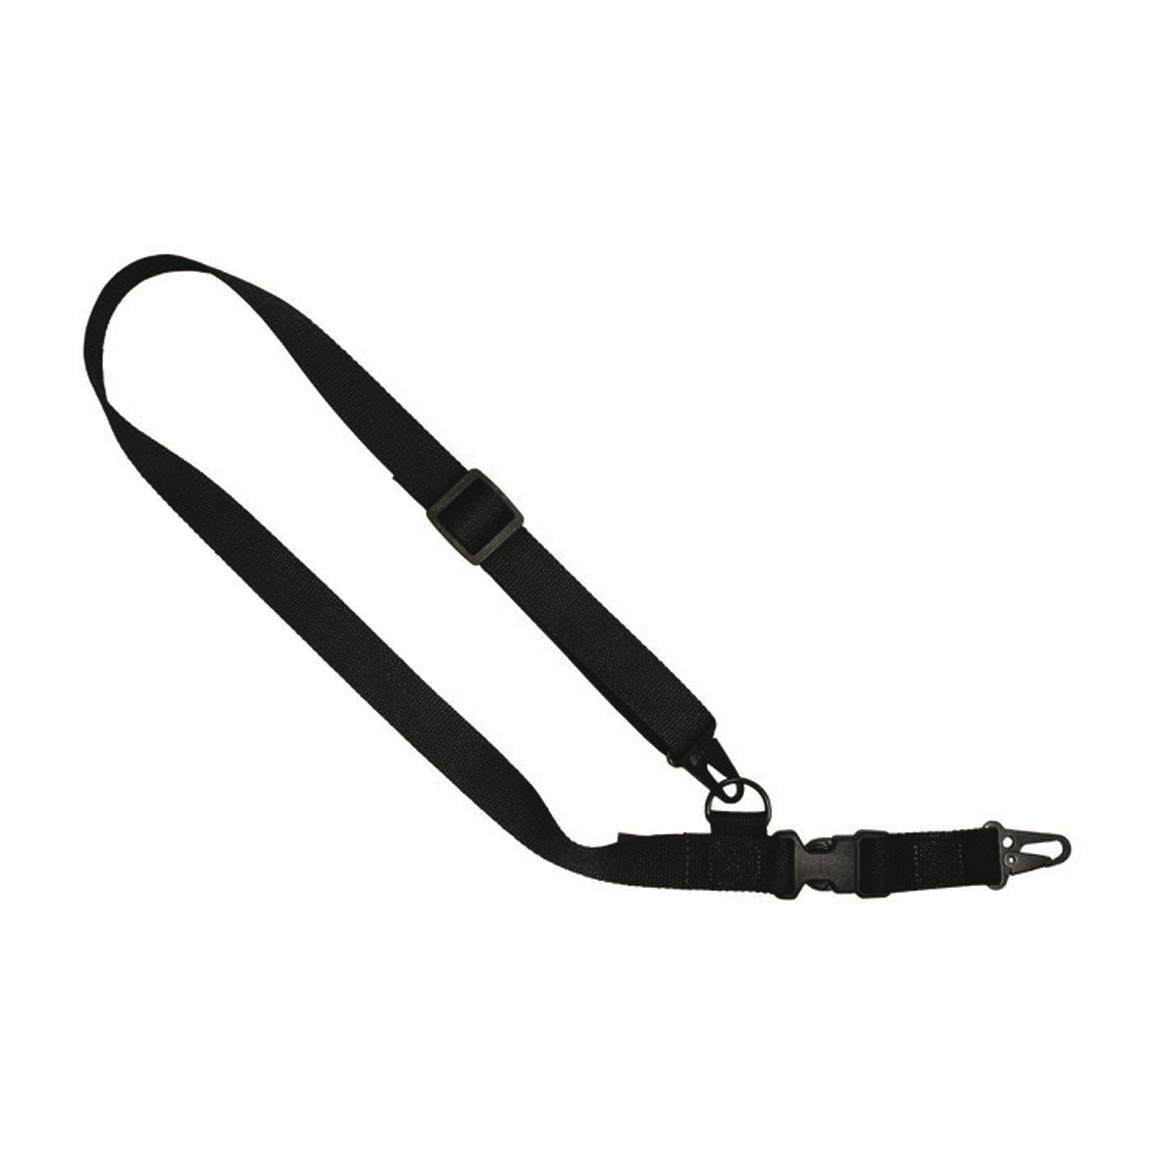 United States Tactical C1: 2-to-1 Point Tactical Sling, Black